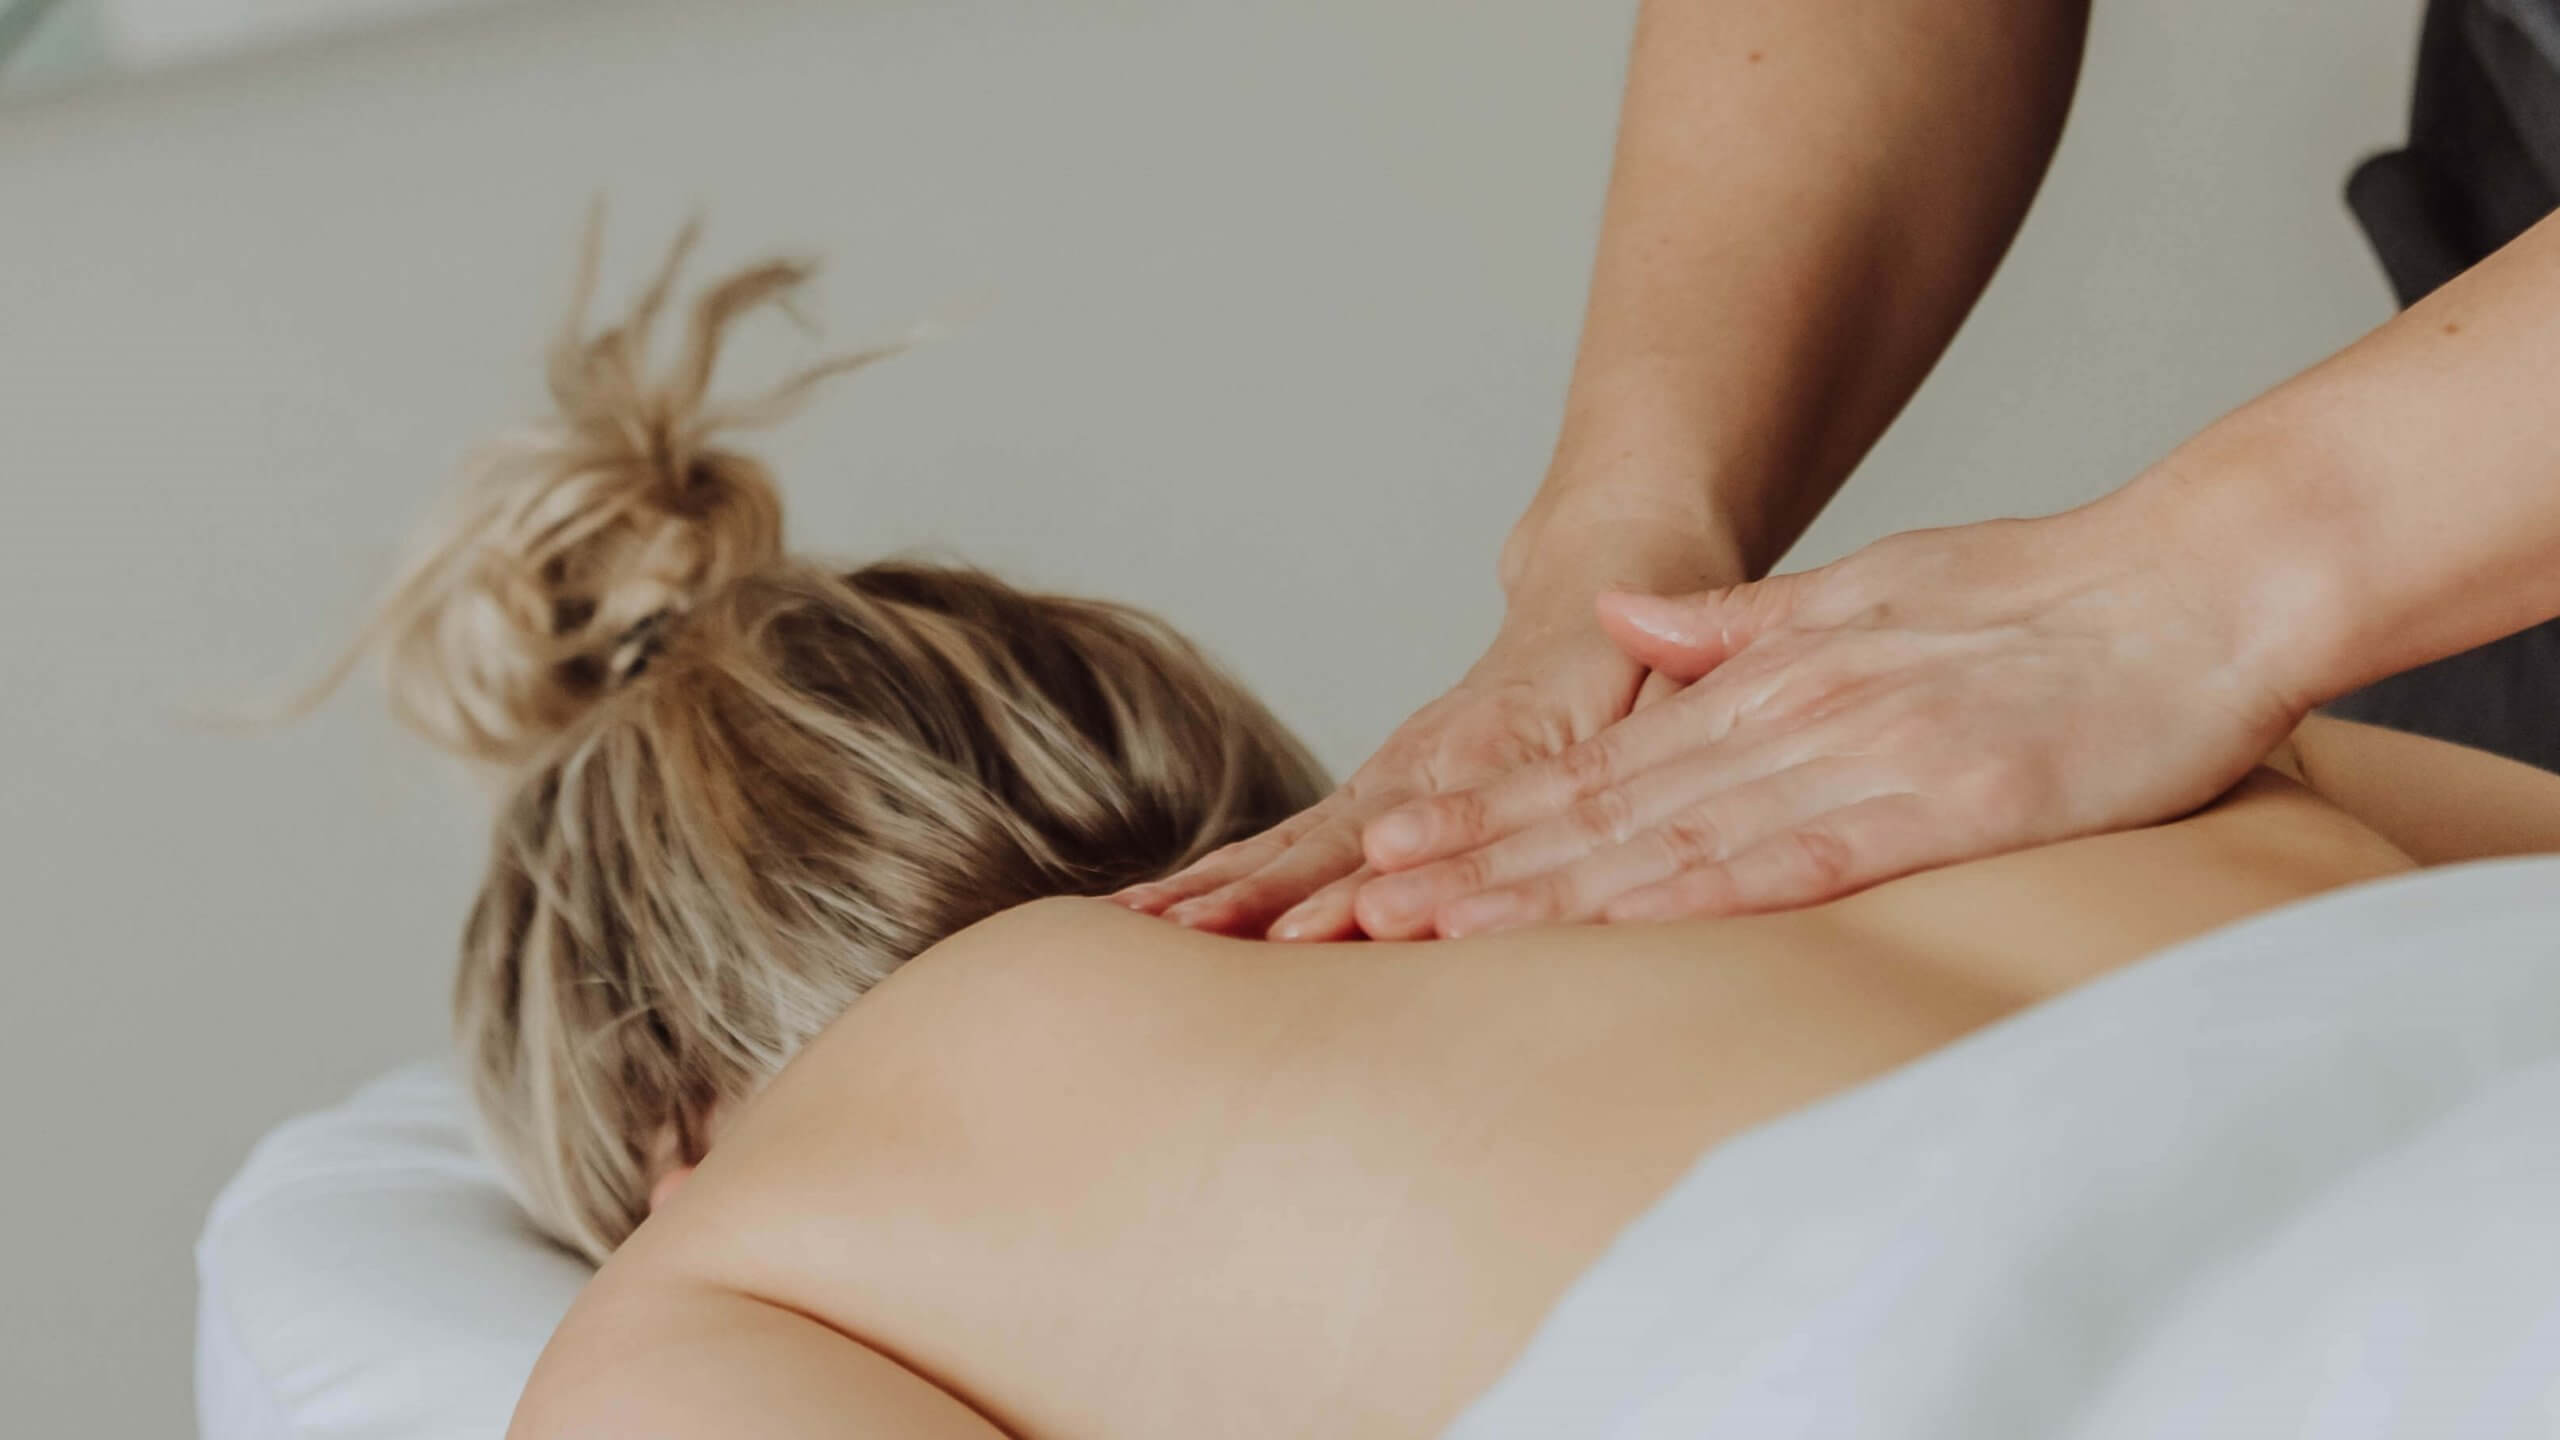 A Woman getting Massage Therapy | Wellness Co in Zeeland, MI